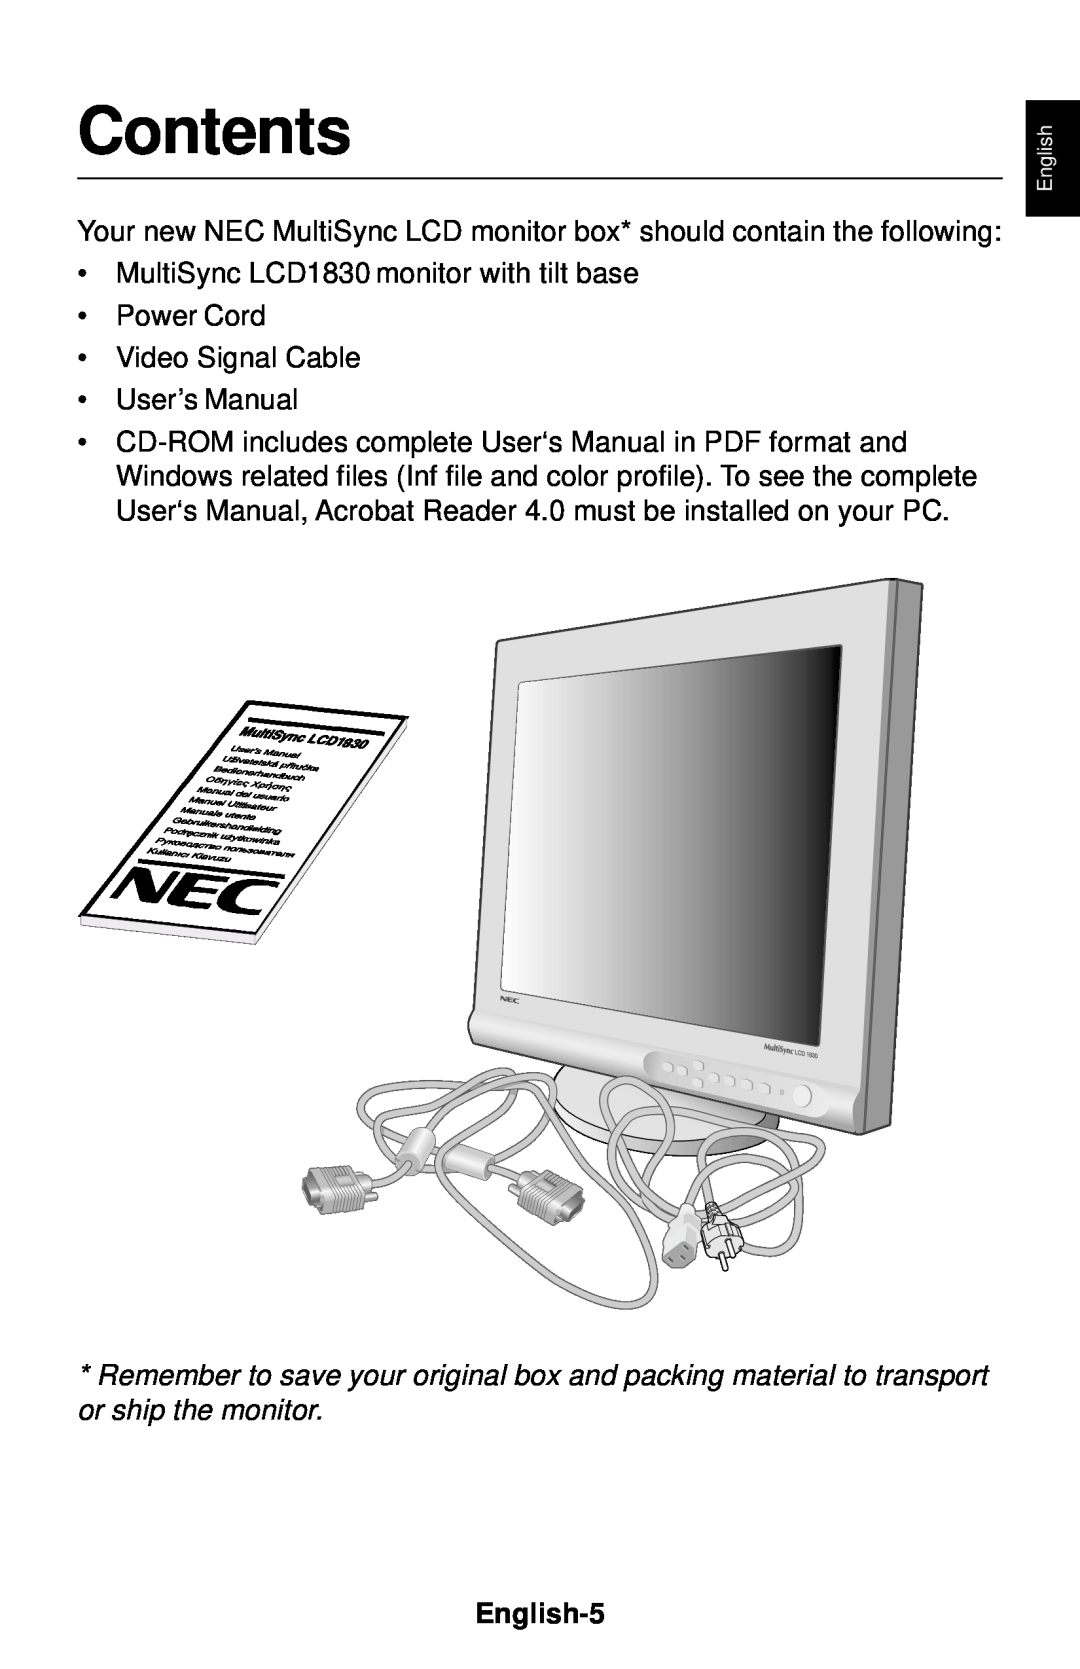 NEC LCD1830 user manual Contents, English-5 